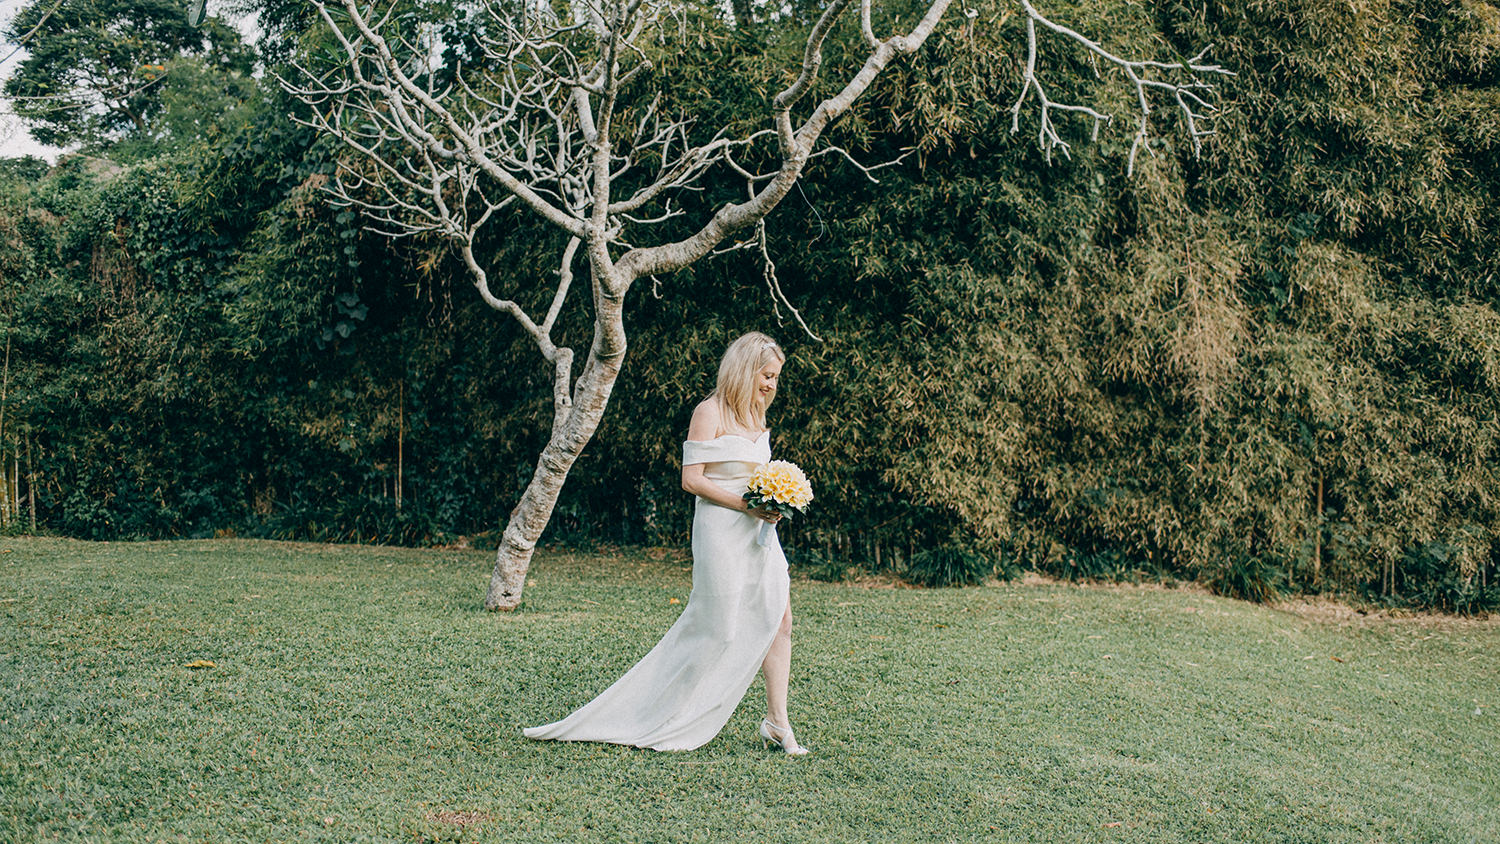 Elopement Wedding Video in Alila Ubud — Lovely Chris & Lucy